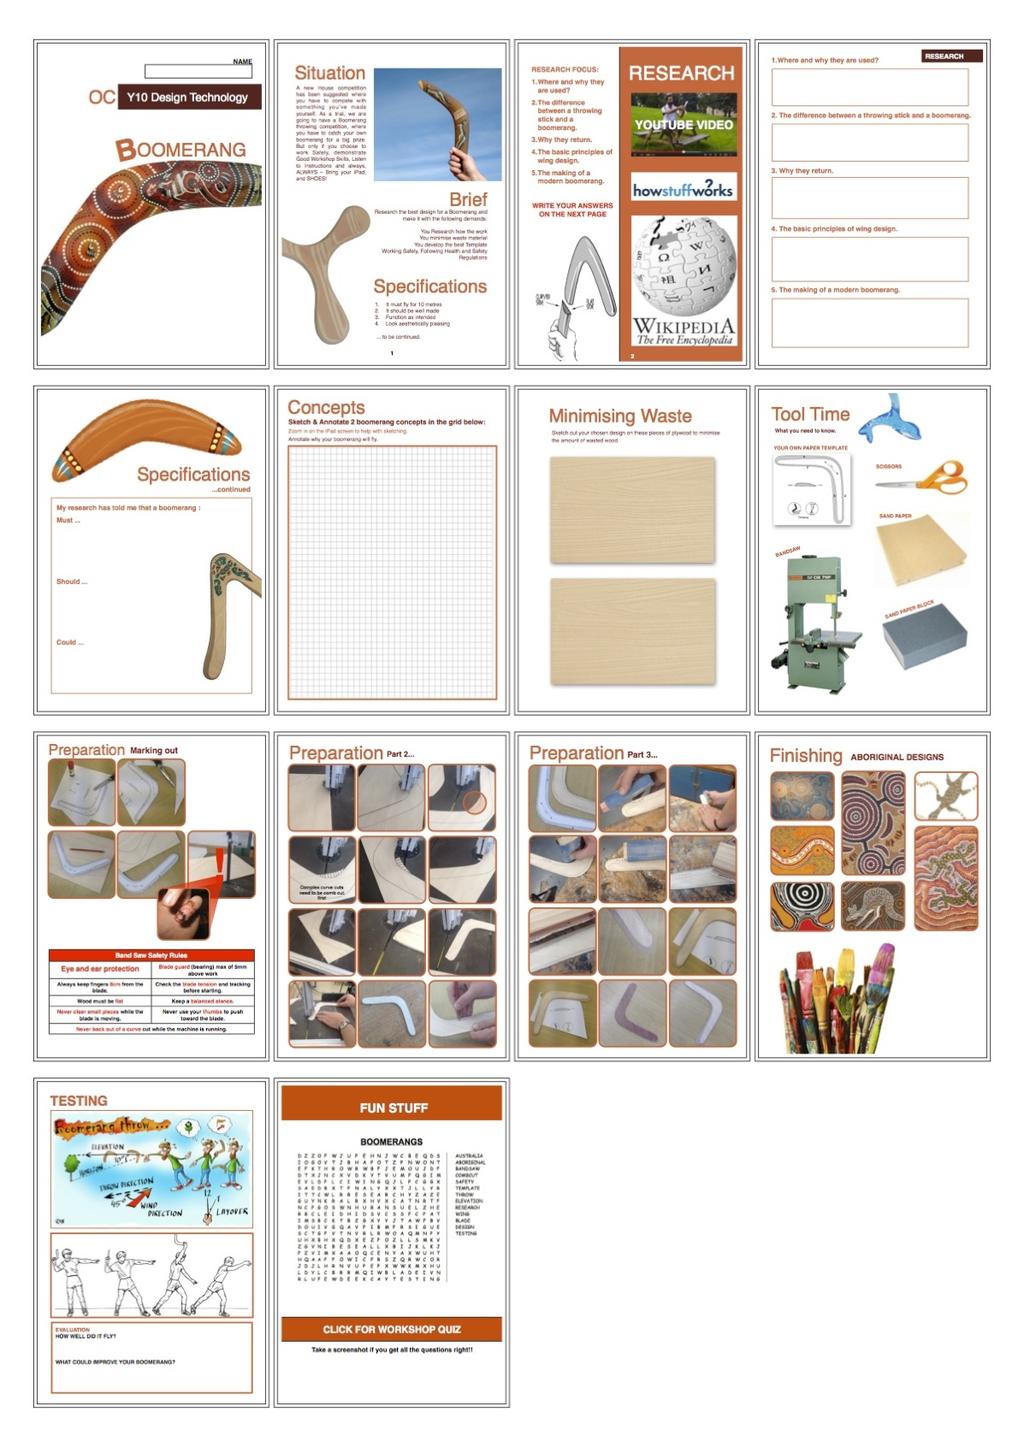 Example Worksheet includes: Clickable Web Links Free hand Design